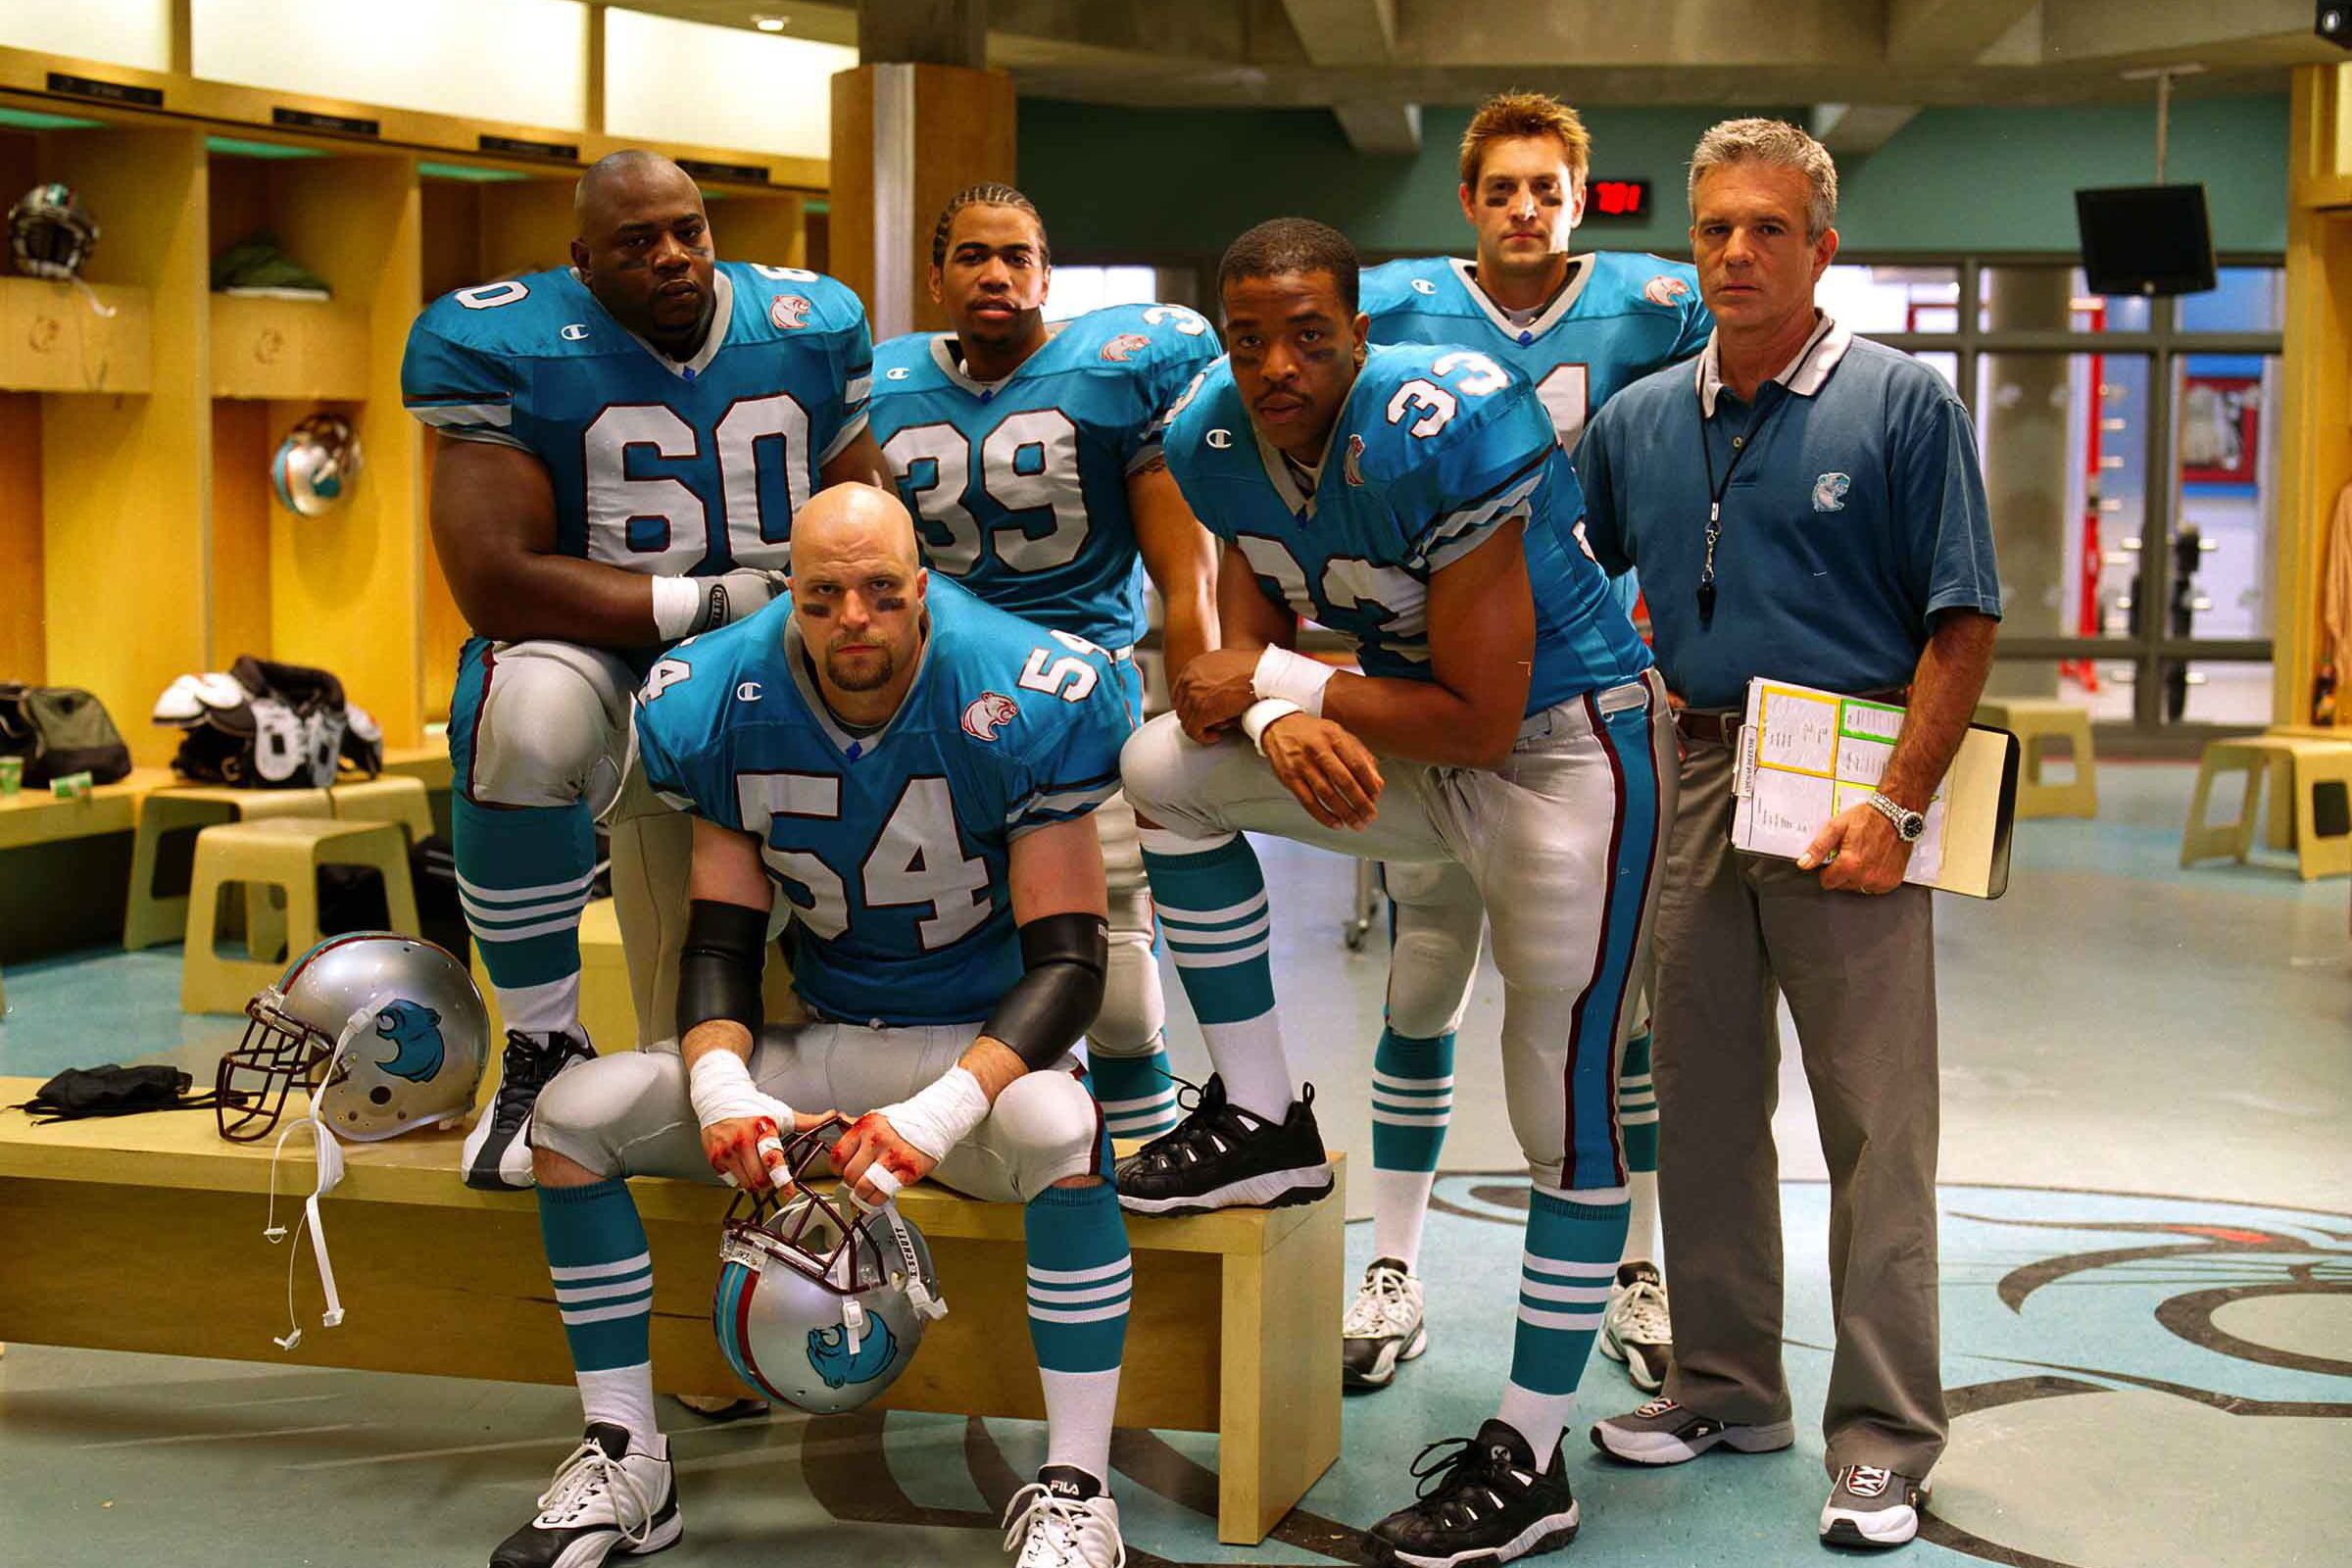 A photo of five Cougars football players in uniform in a locker room. The head coach stands next to them wearing a Cougars polo shirt and holding a clipboard.